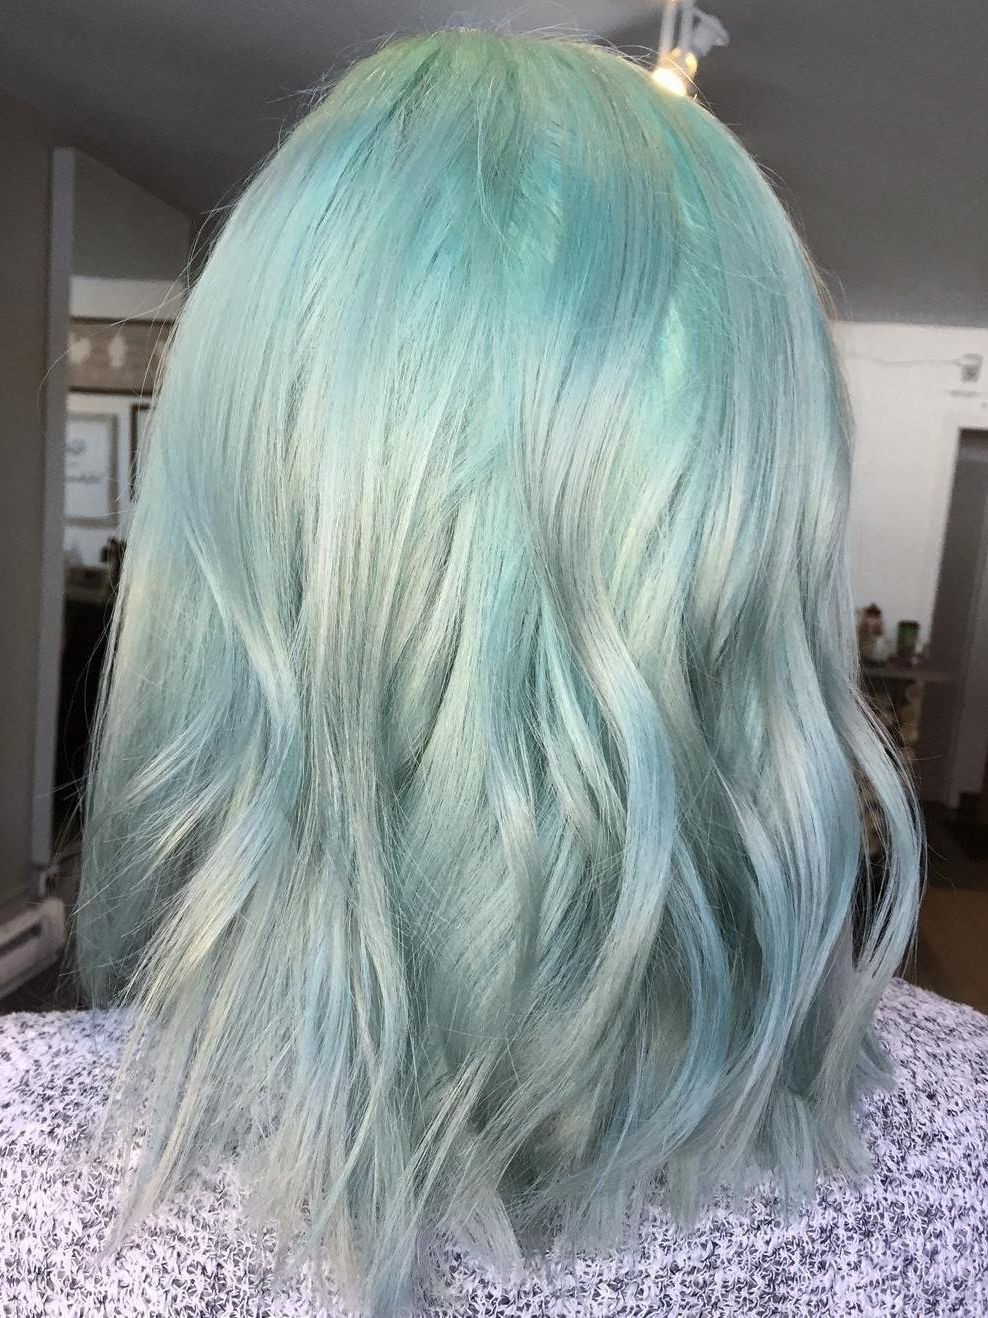 20 Mint Green Hairstyles That Are Totally Amazing Intended For Best And Newest Blonde Hairstyles With Green Highlights (View 4 of 20)